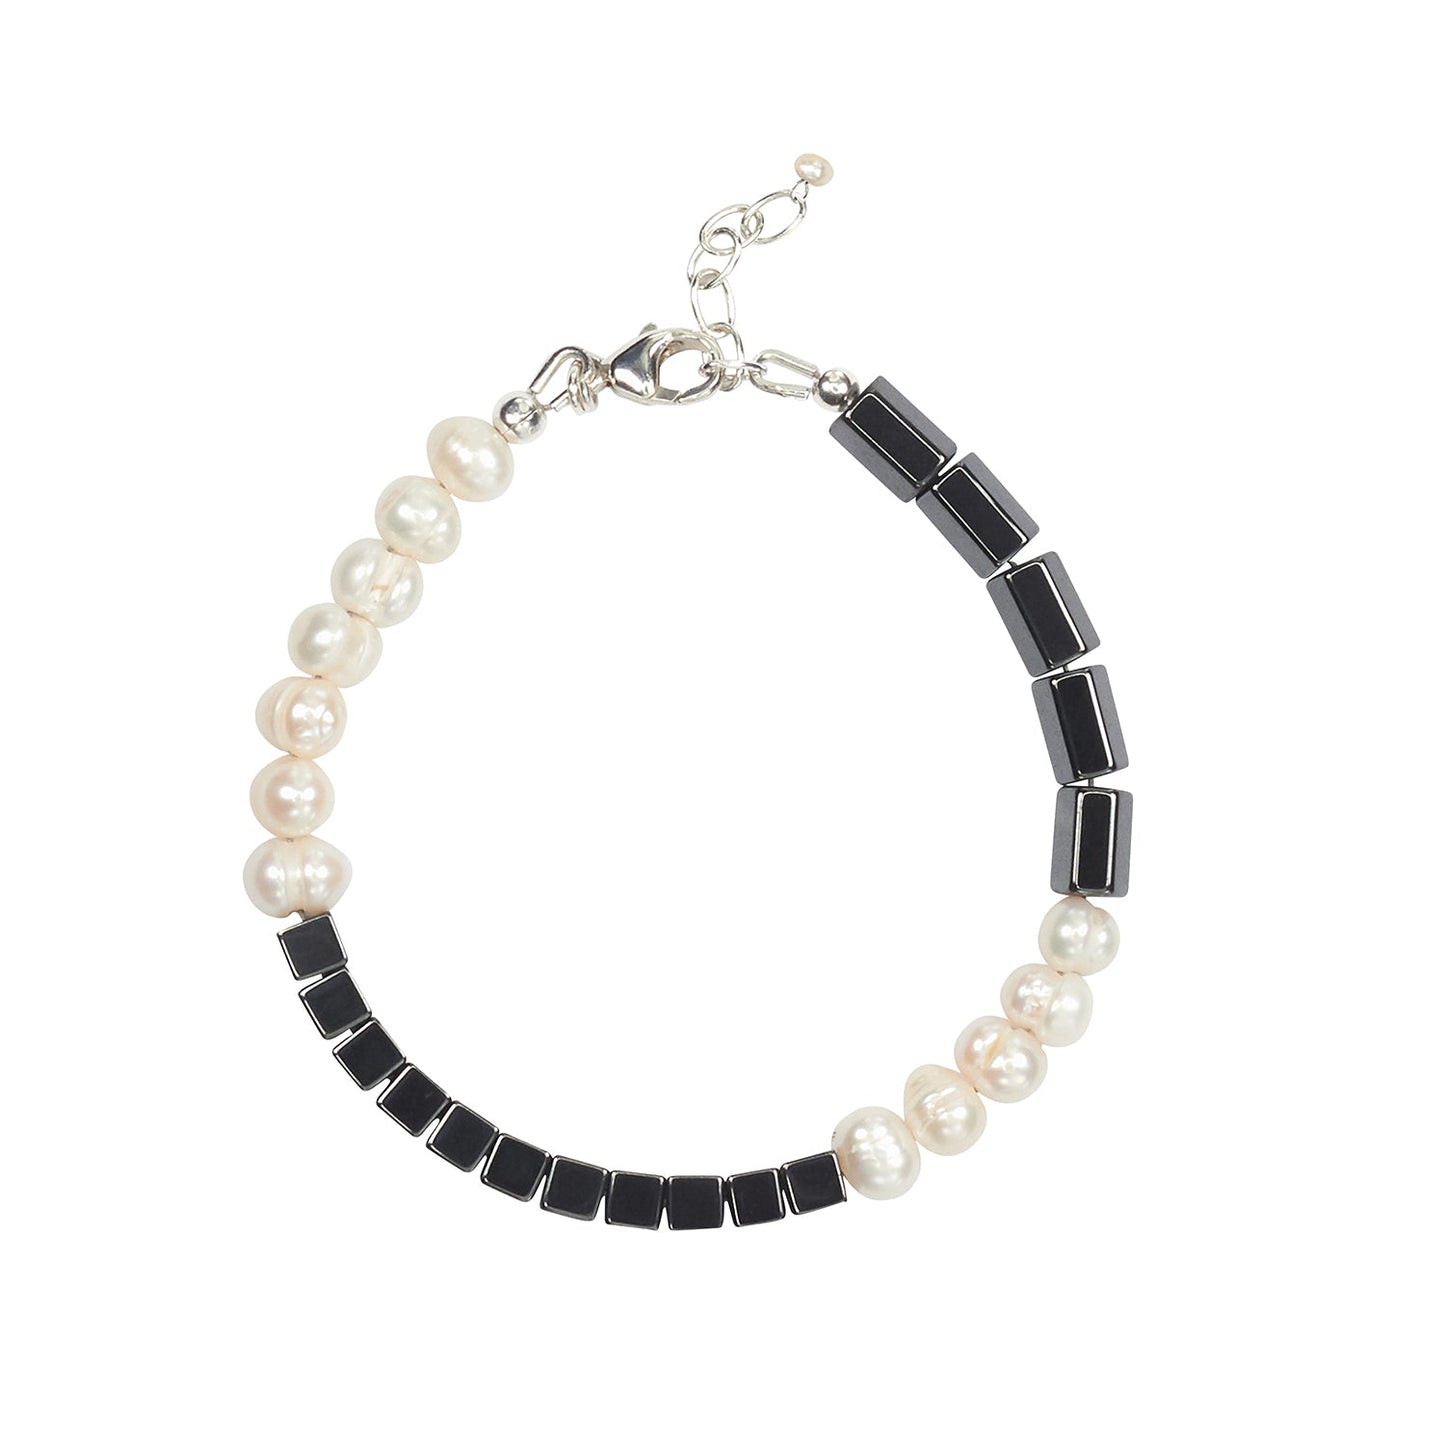 Quadrant Bracelet with Freshwater Pearls and Hematine - set of 3